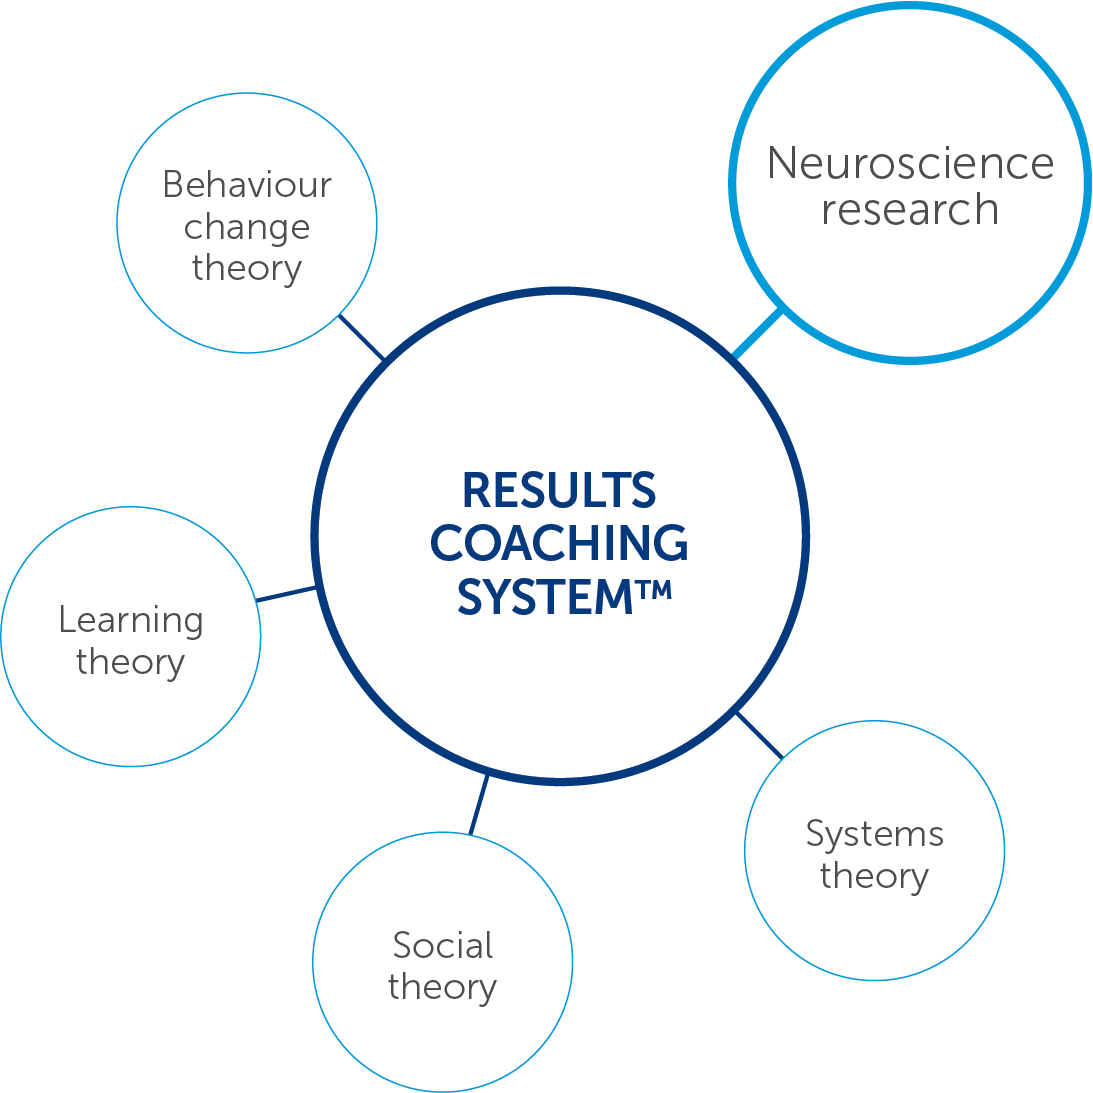 NLI_COACH_object_RCS_theoretical_approach_A4